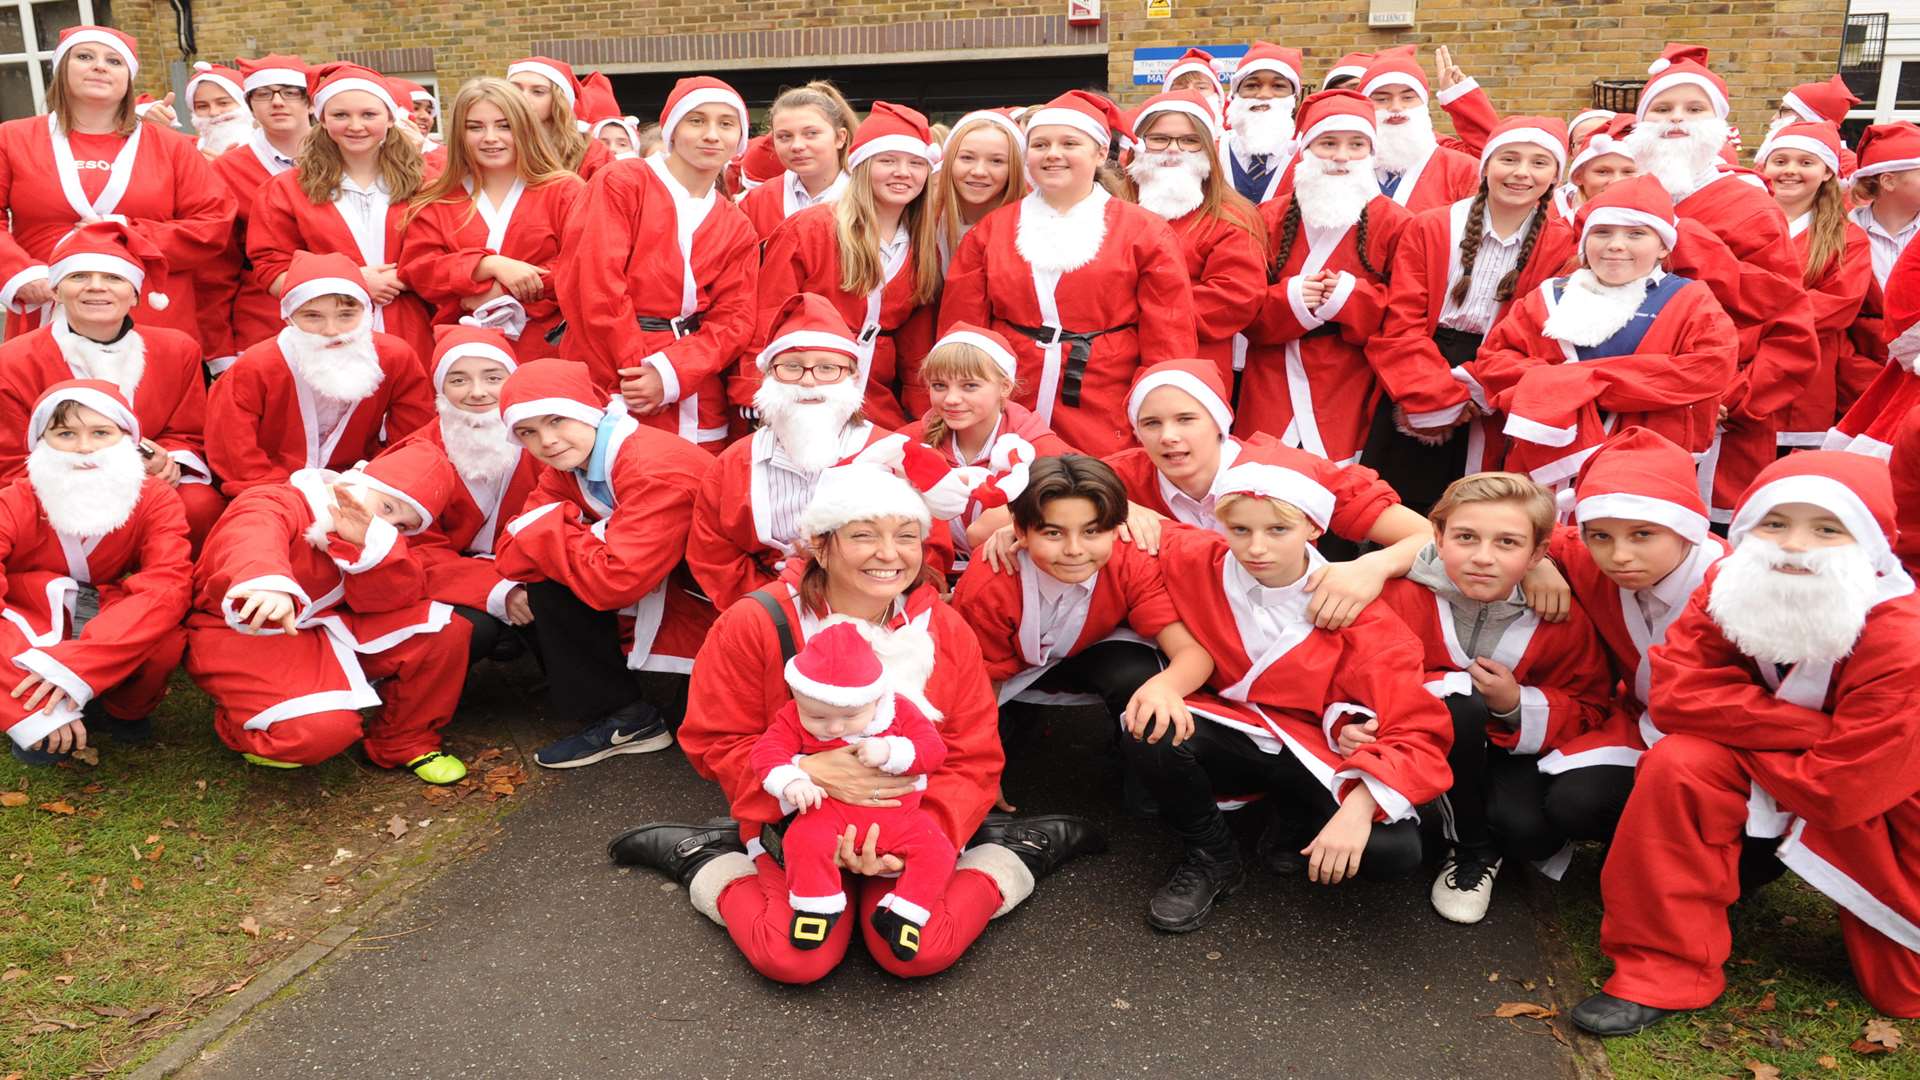 Pupils from Resolute House at Thomas Aveling take part in the annual Santa fun run